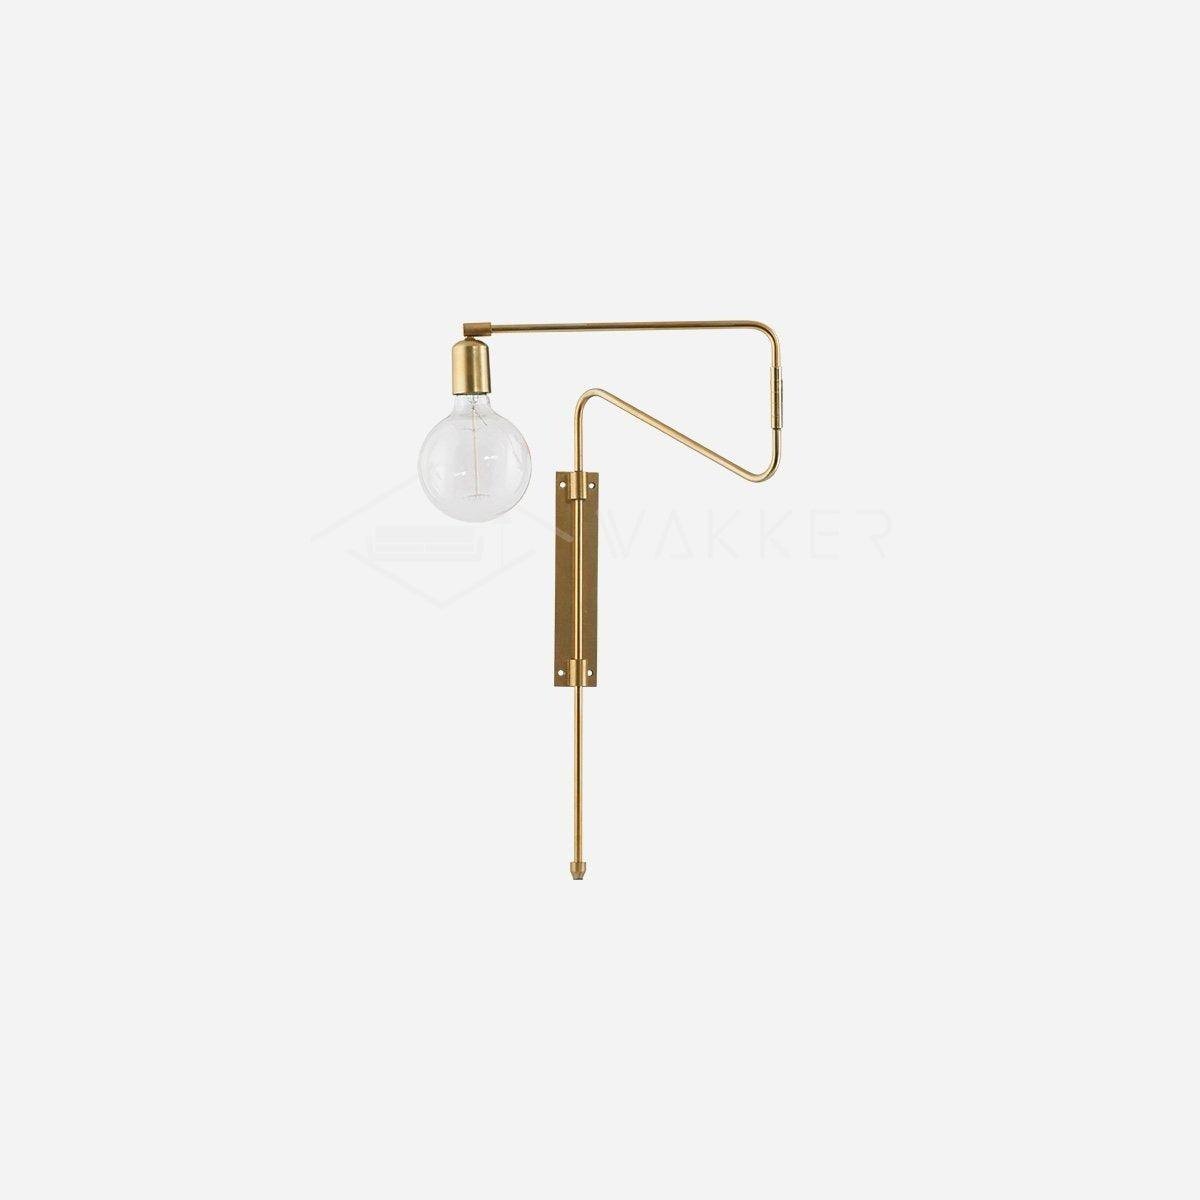 European plug Brass Swing Wall Lamp measuring 27.6 inches in diameter and 26.4 inches in height (or 70cm x 67cm)